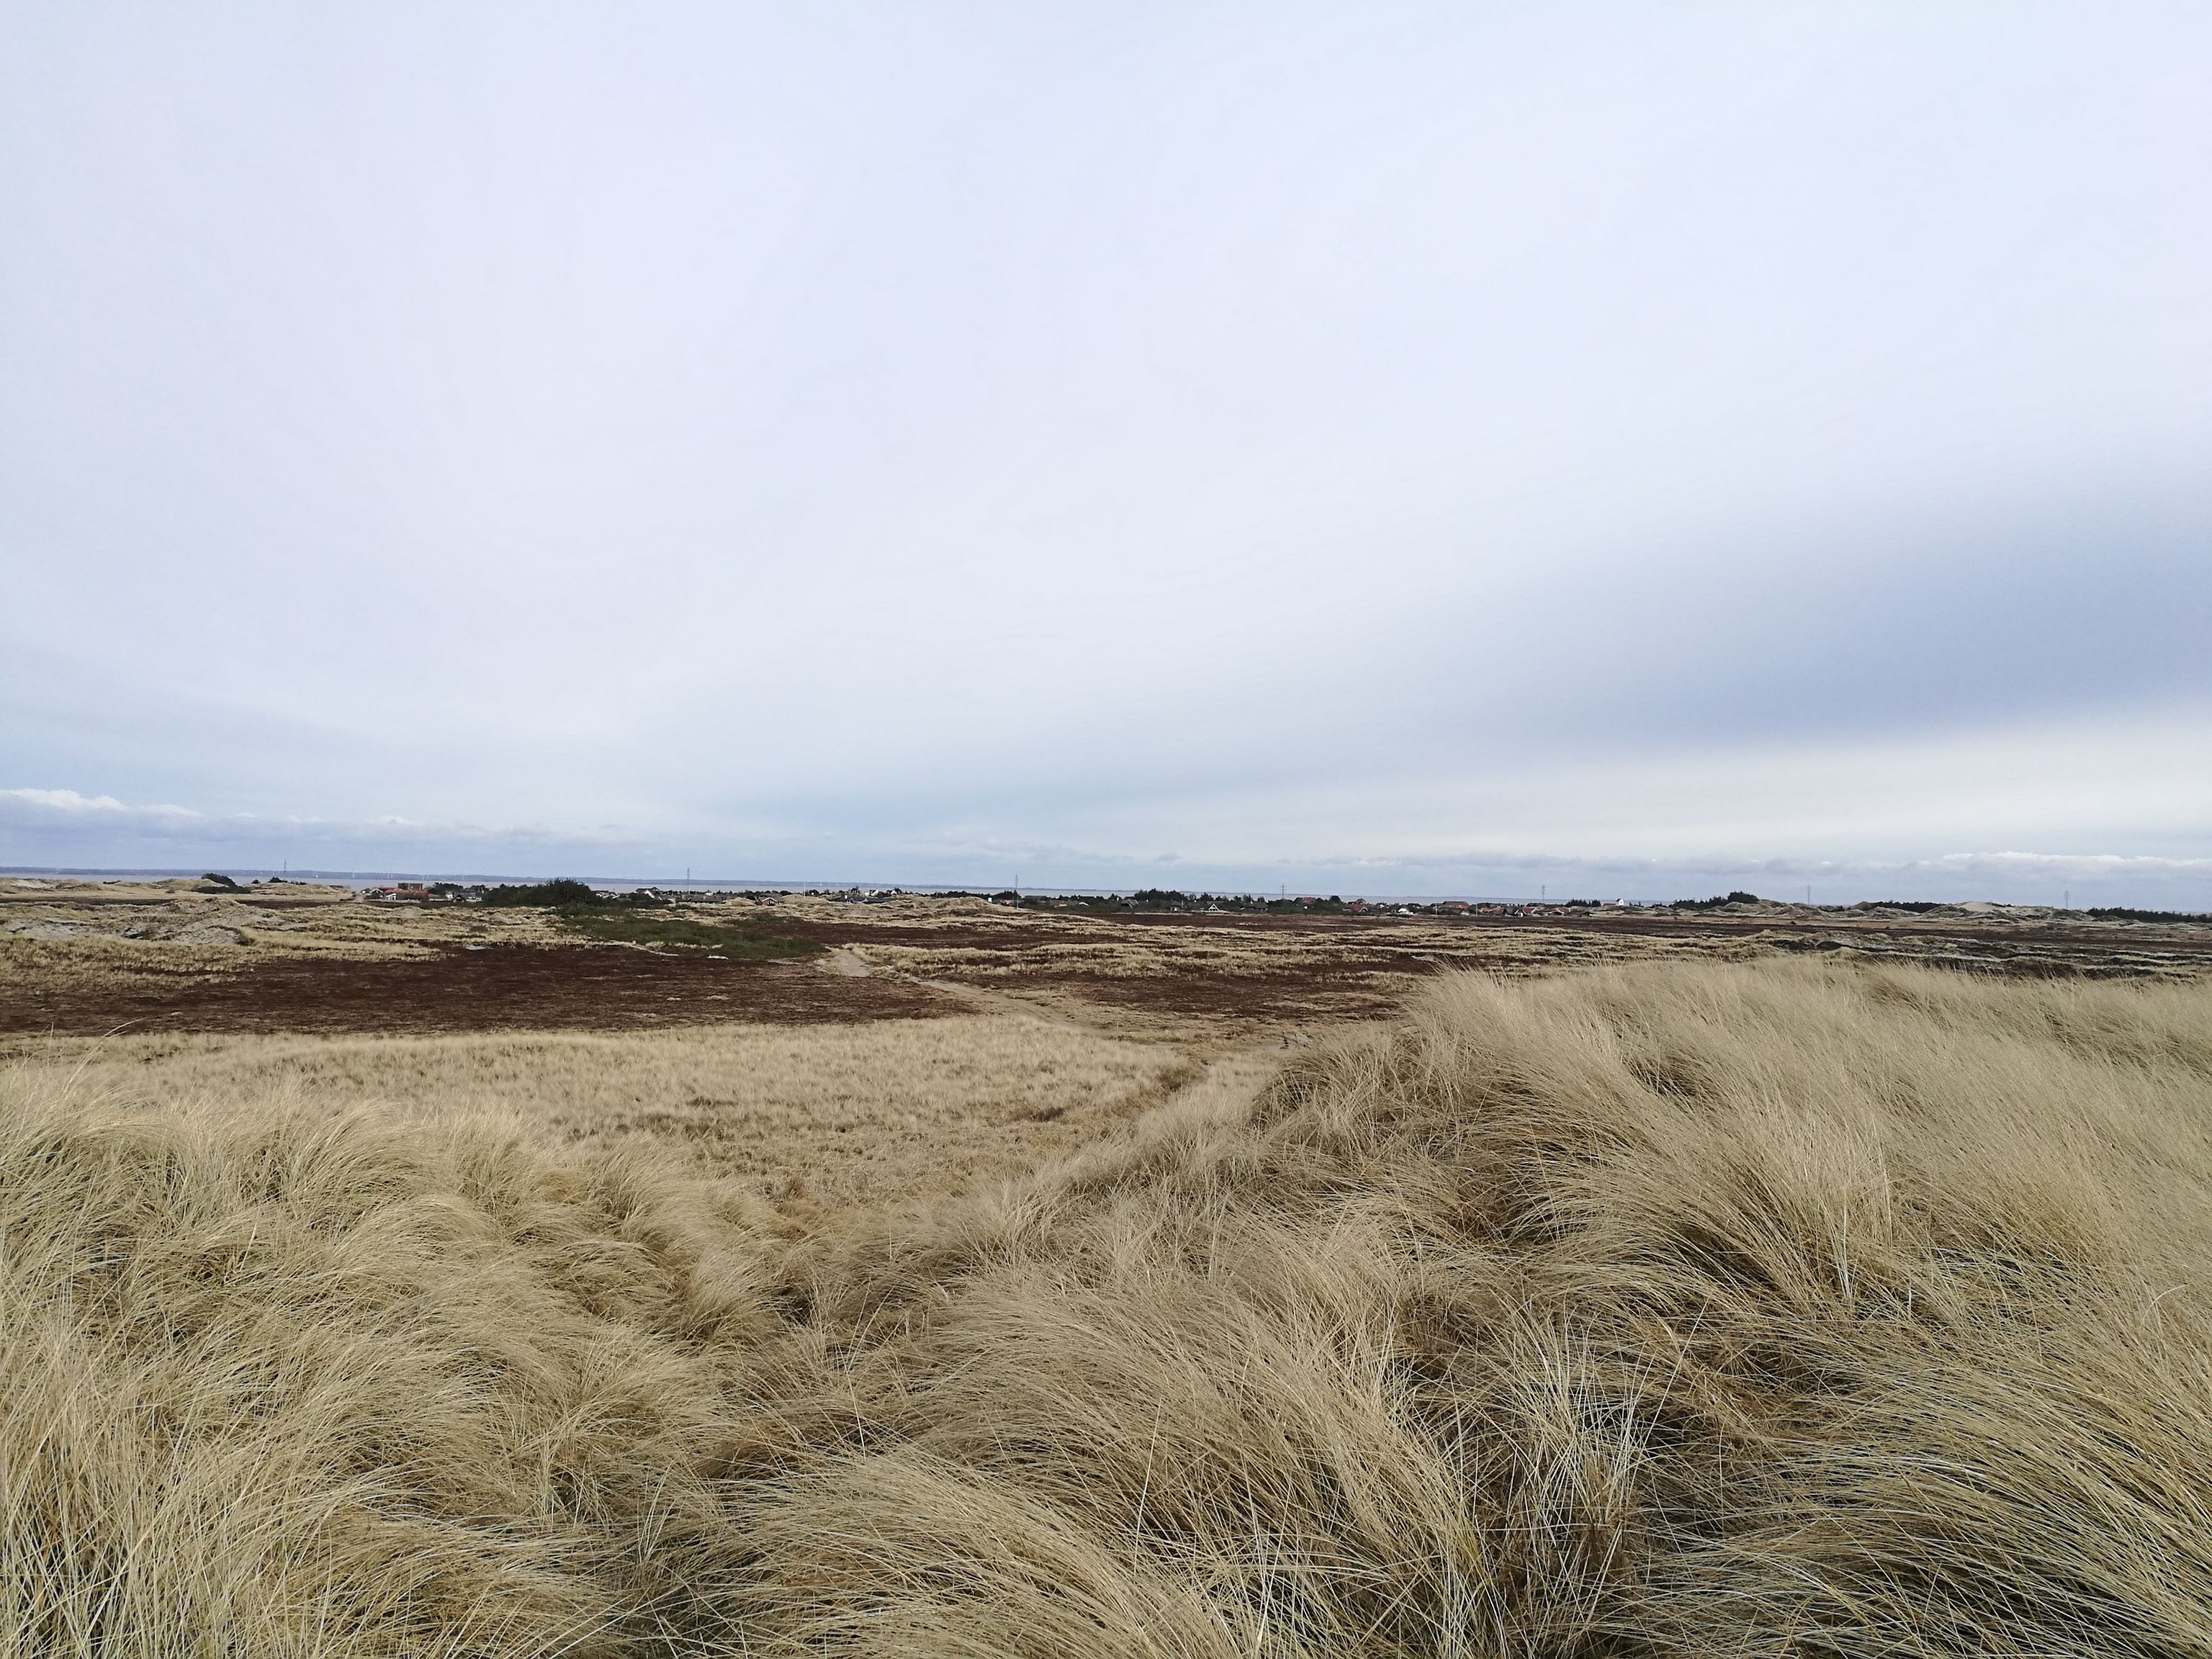 On a dune, with a view of a wide landscape. A few houses can be seen in the distance.